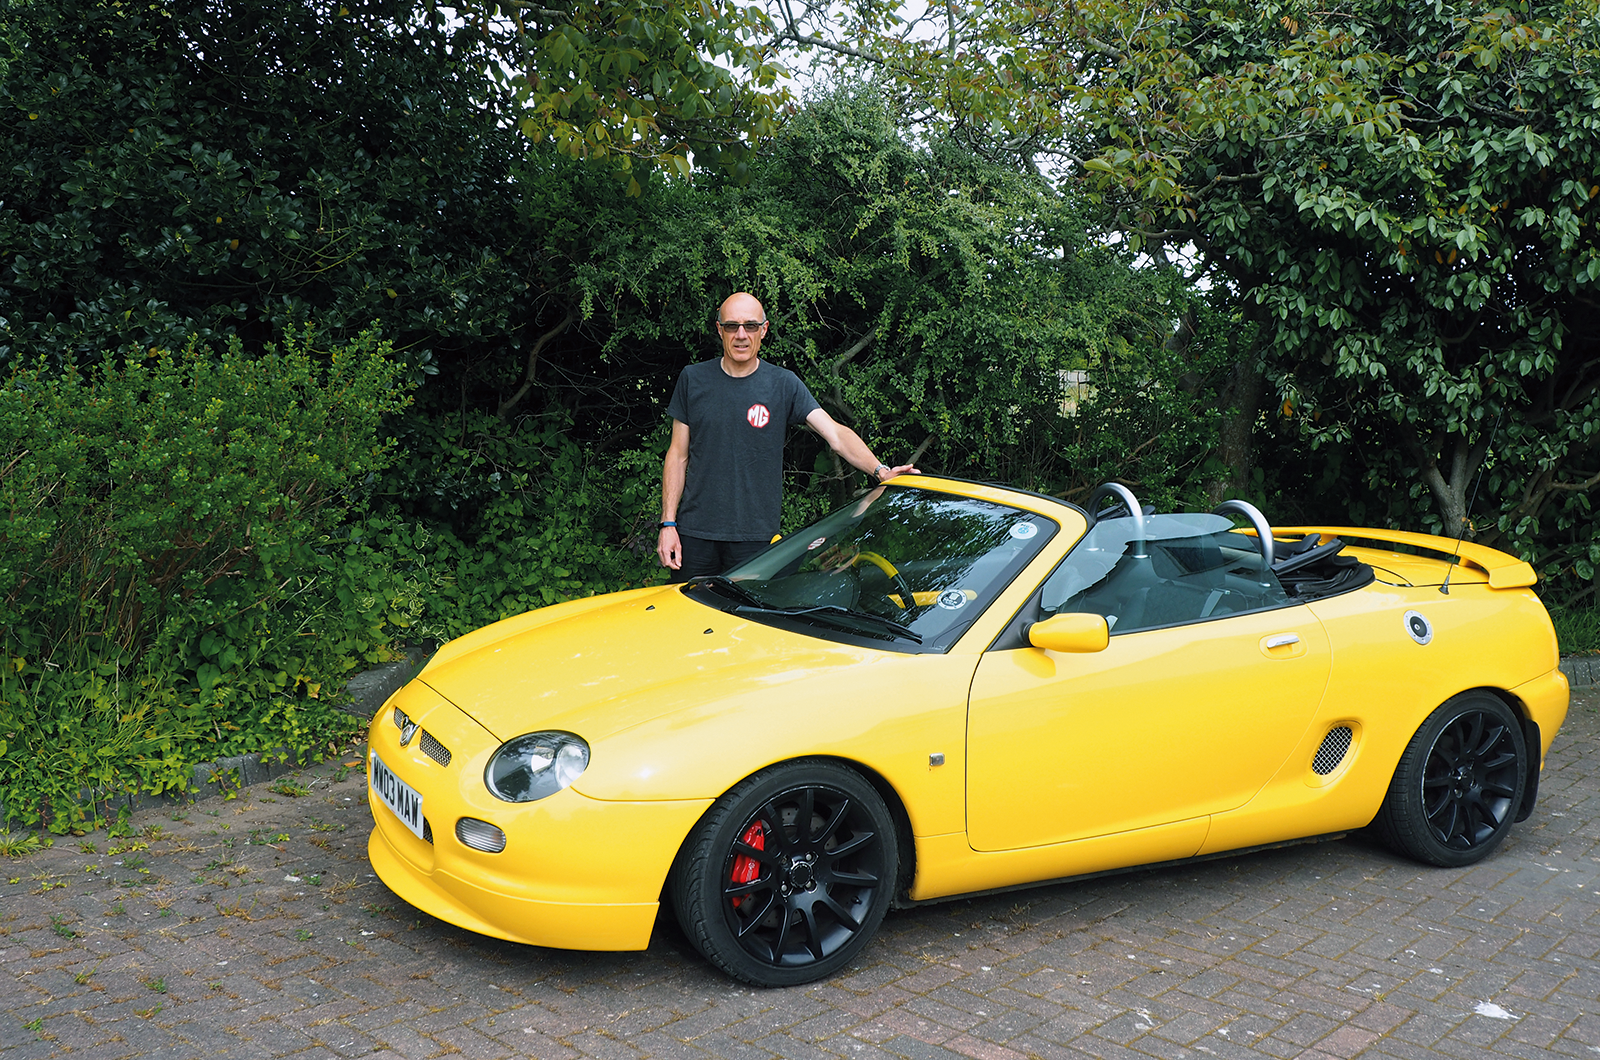 Classic & Sports Car – Buyer’s guide: MGF